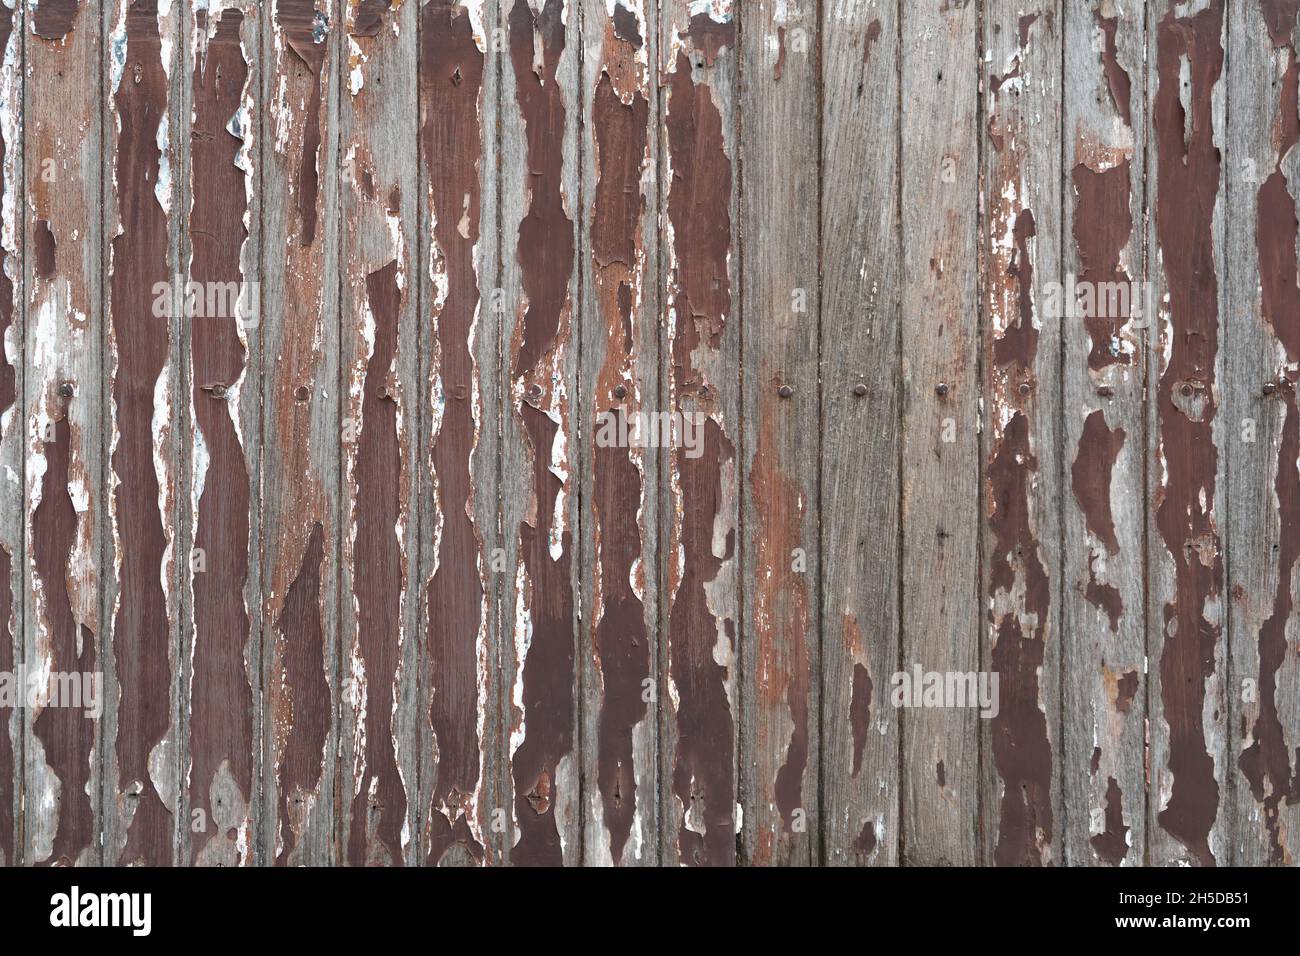 Old wood fence with peeling paint Stock Photo